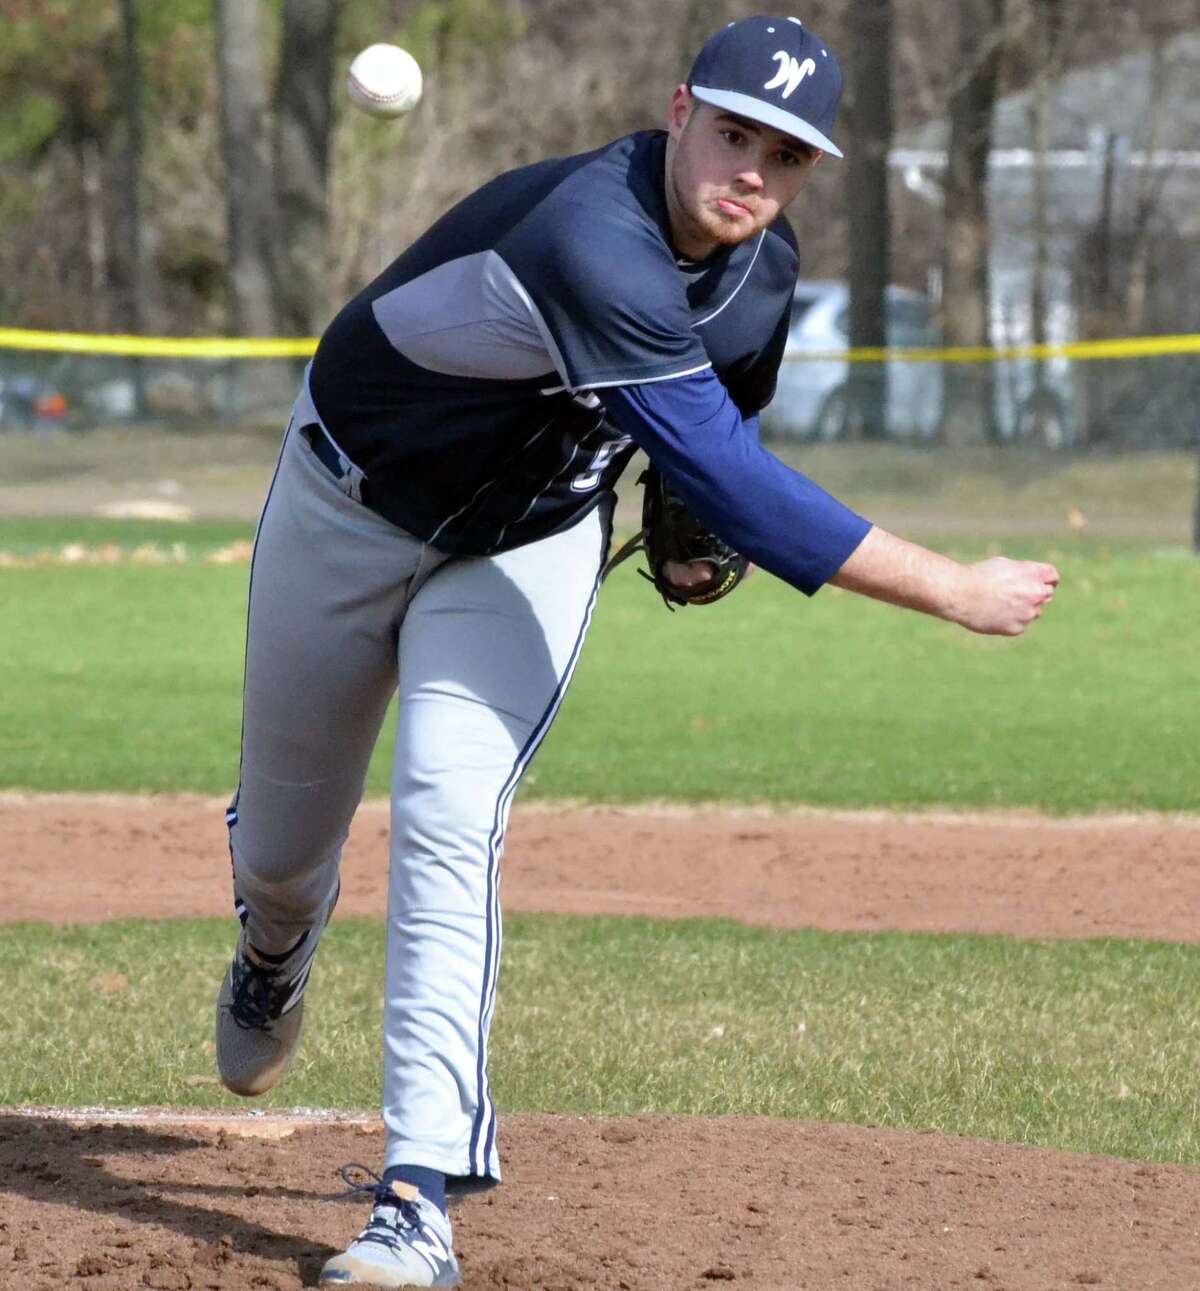 Wethersfield’s Tim Blaisdell pitches against Windsor on Wednesday, April 18, 2018. (Pete Paguaga, Hearst Media Group)